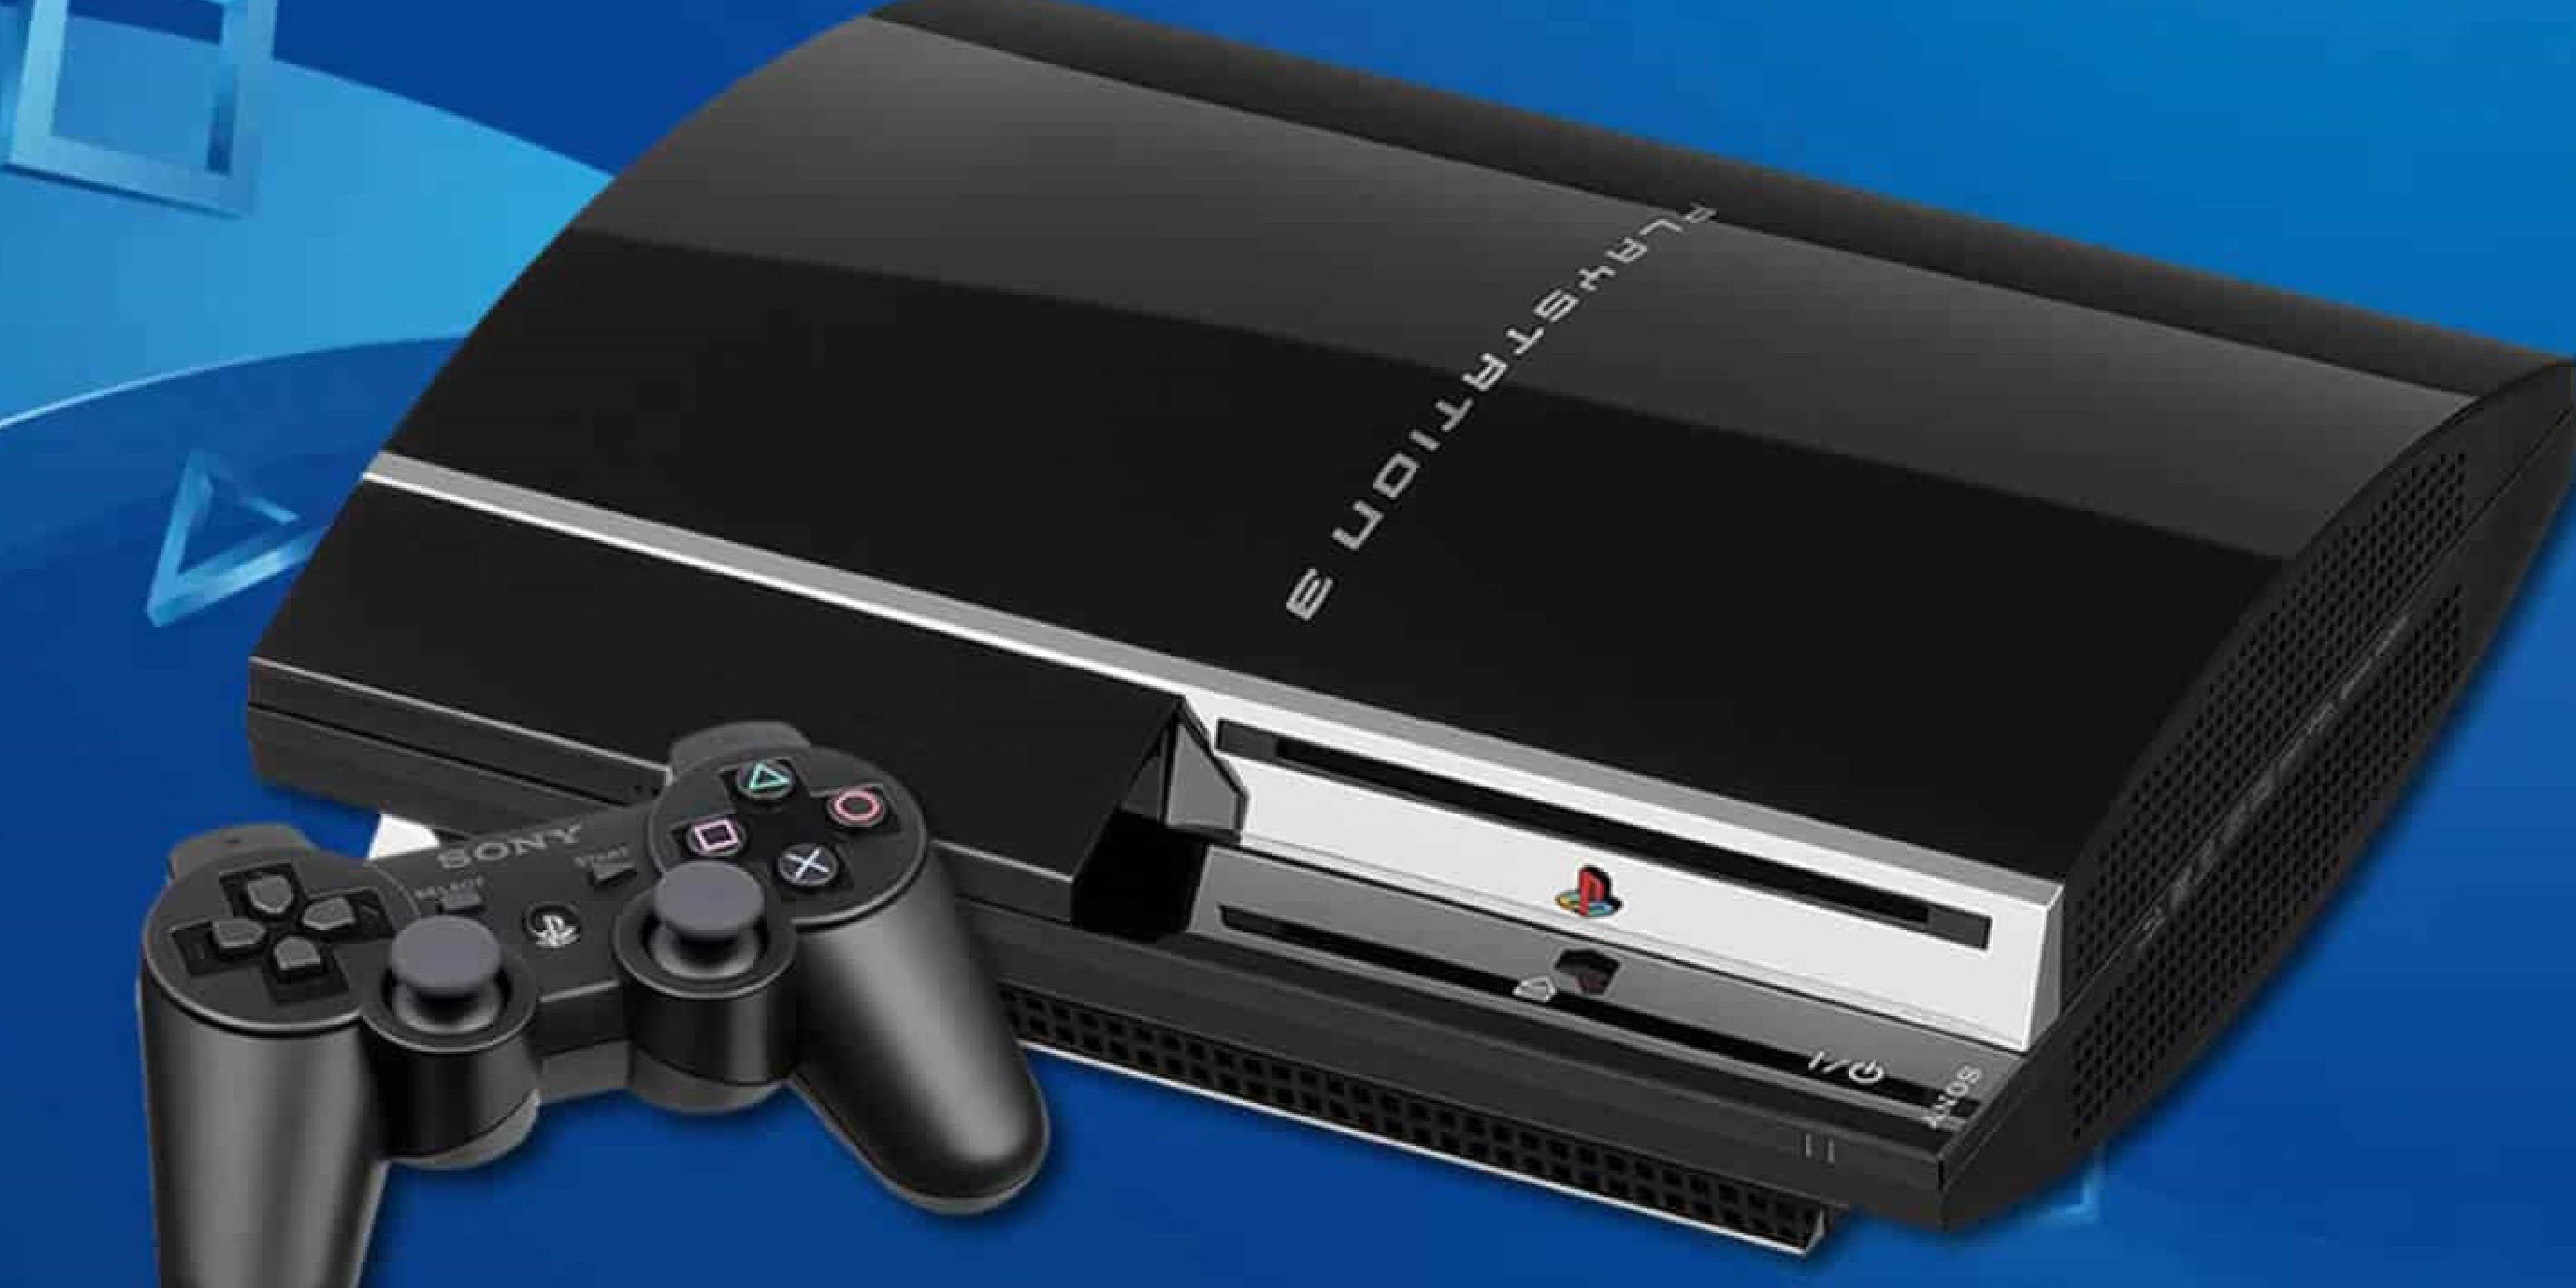 PlayStation 3 Console And Controller